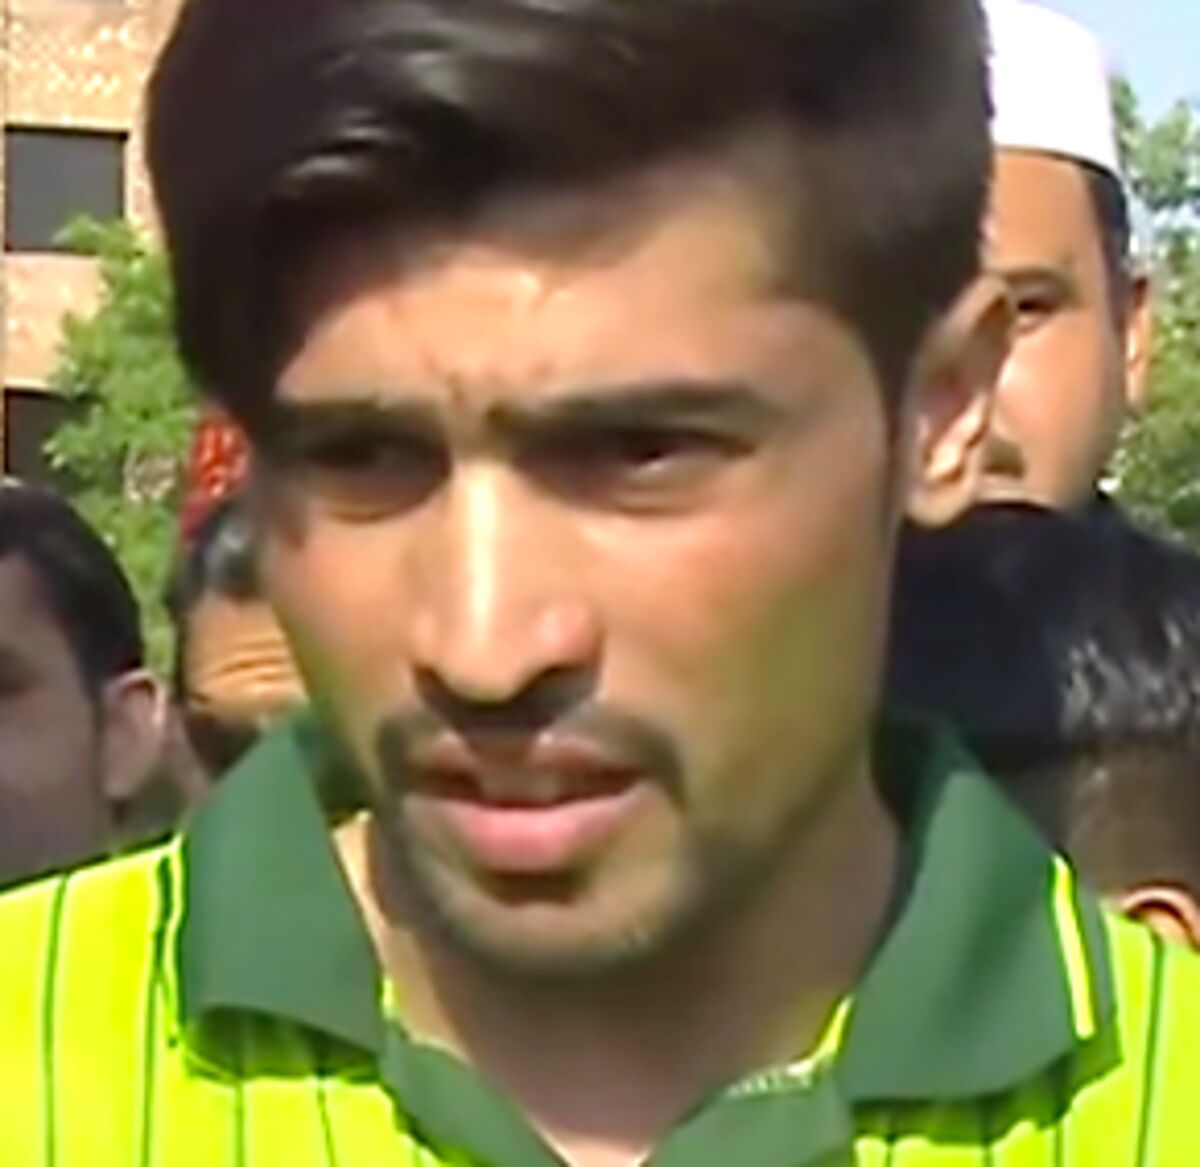 Mohammad Aamer - Famous Cricketer